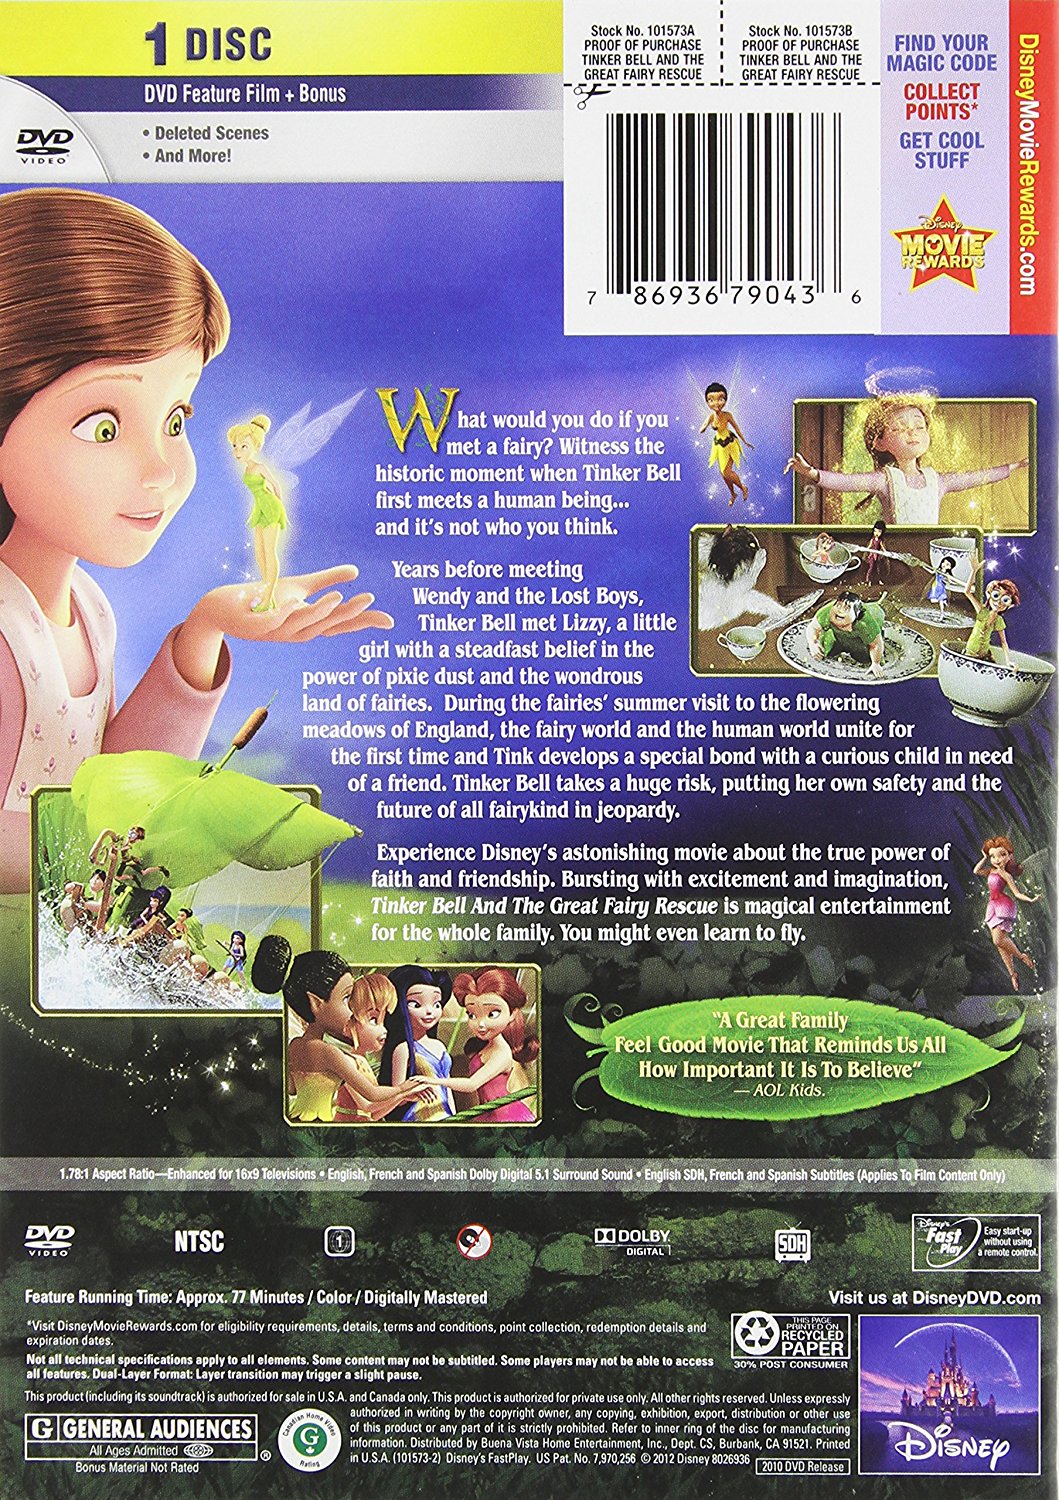 Tinker Bell and the Great Fairy Rescue (DVD) - image 2 of 7